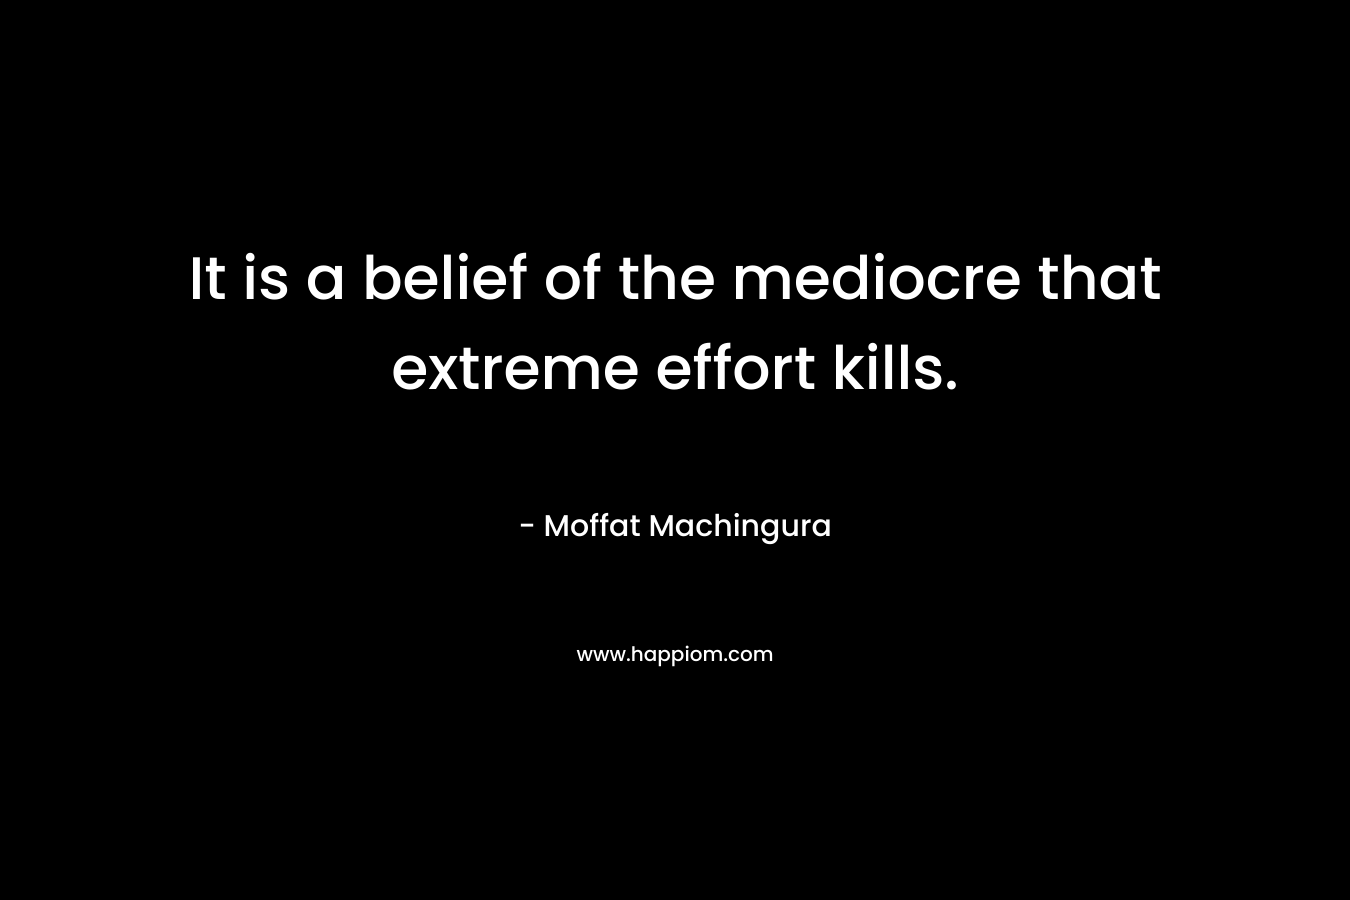 It is a belief of the mediocre that extreme effort kills.